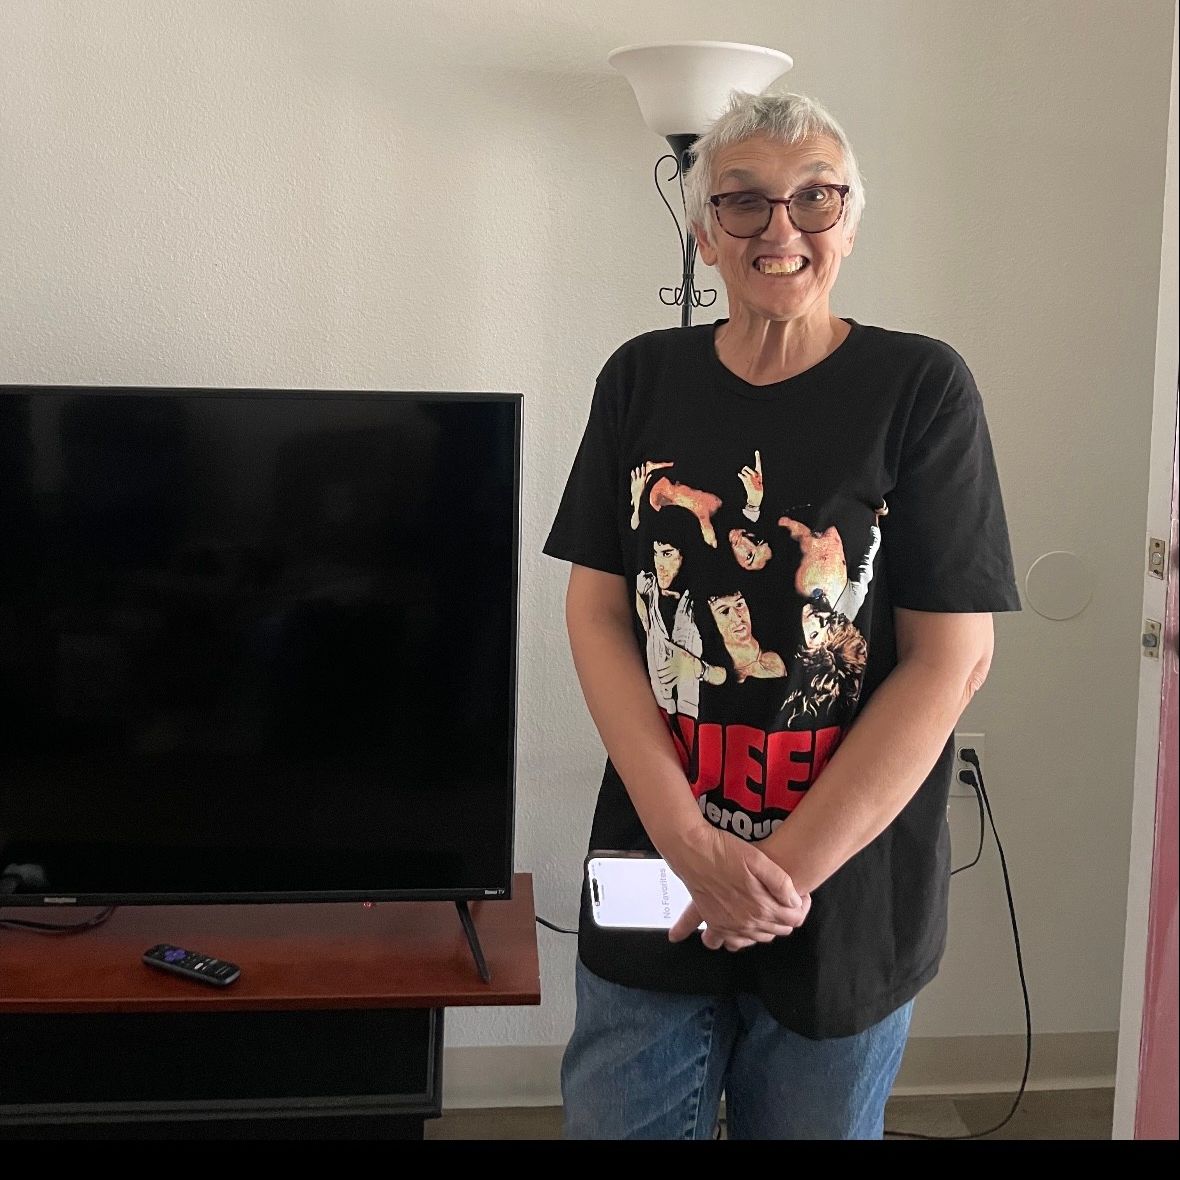 Congrats Amel who recently moved into her new apartment! ⁠
⁠
Amel will live independently with the help of ILS. We are so excited for you Amel! ⁠
⁠
#IndependentLivingServices #Adjoin #Nonprofit #Idd #IddSupport #DisabilitySupport #AffordableHousing #IddCommunity